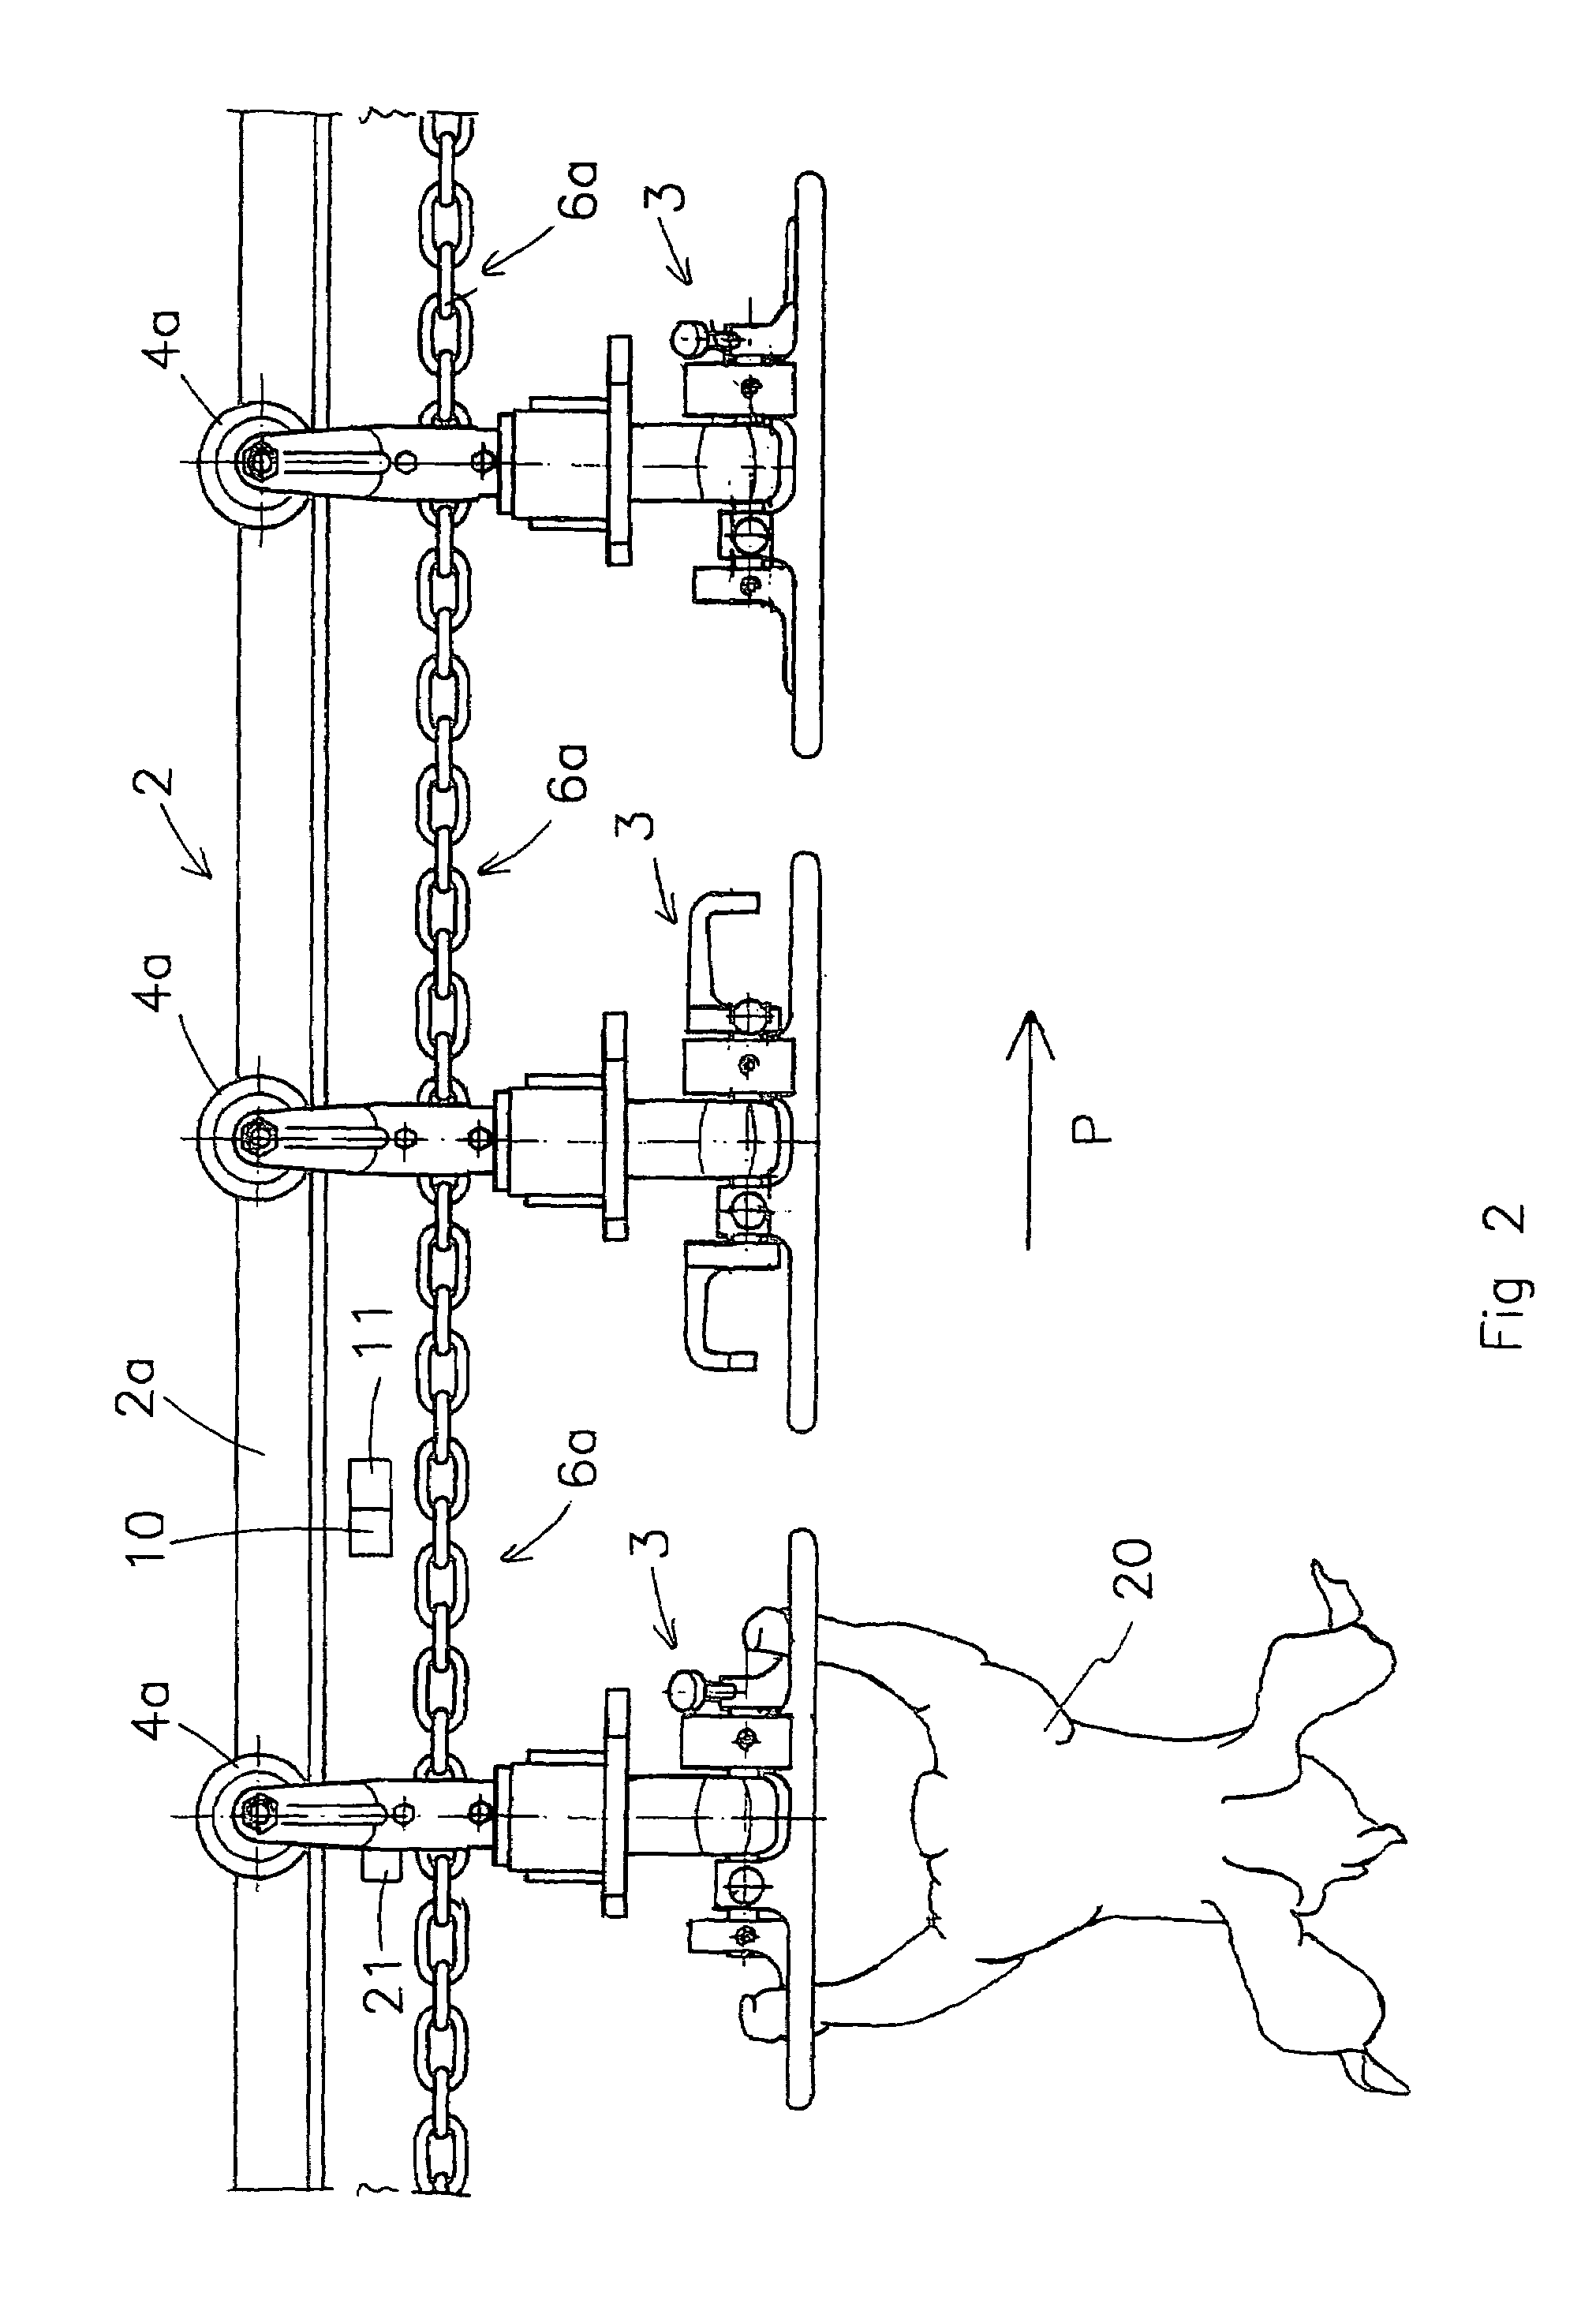 Device and method for processing slaughter animals and/or parts thereof provided with a transportation system